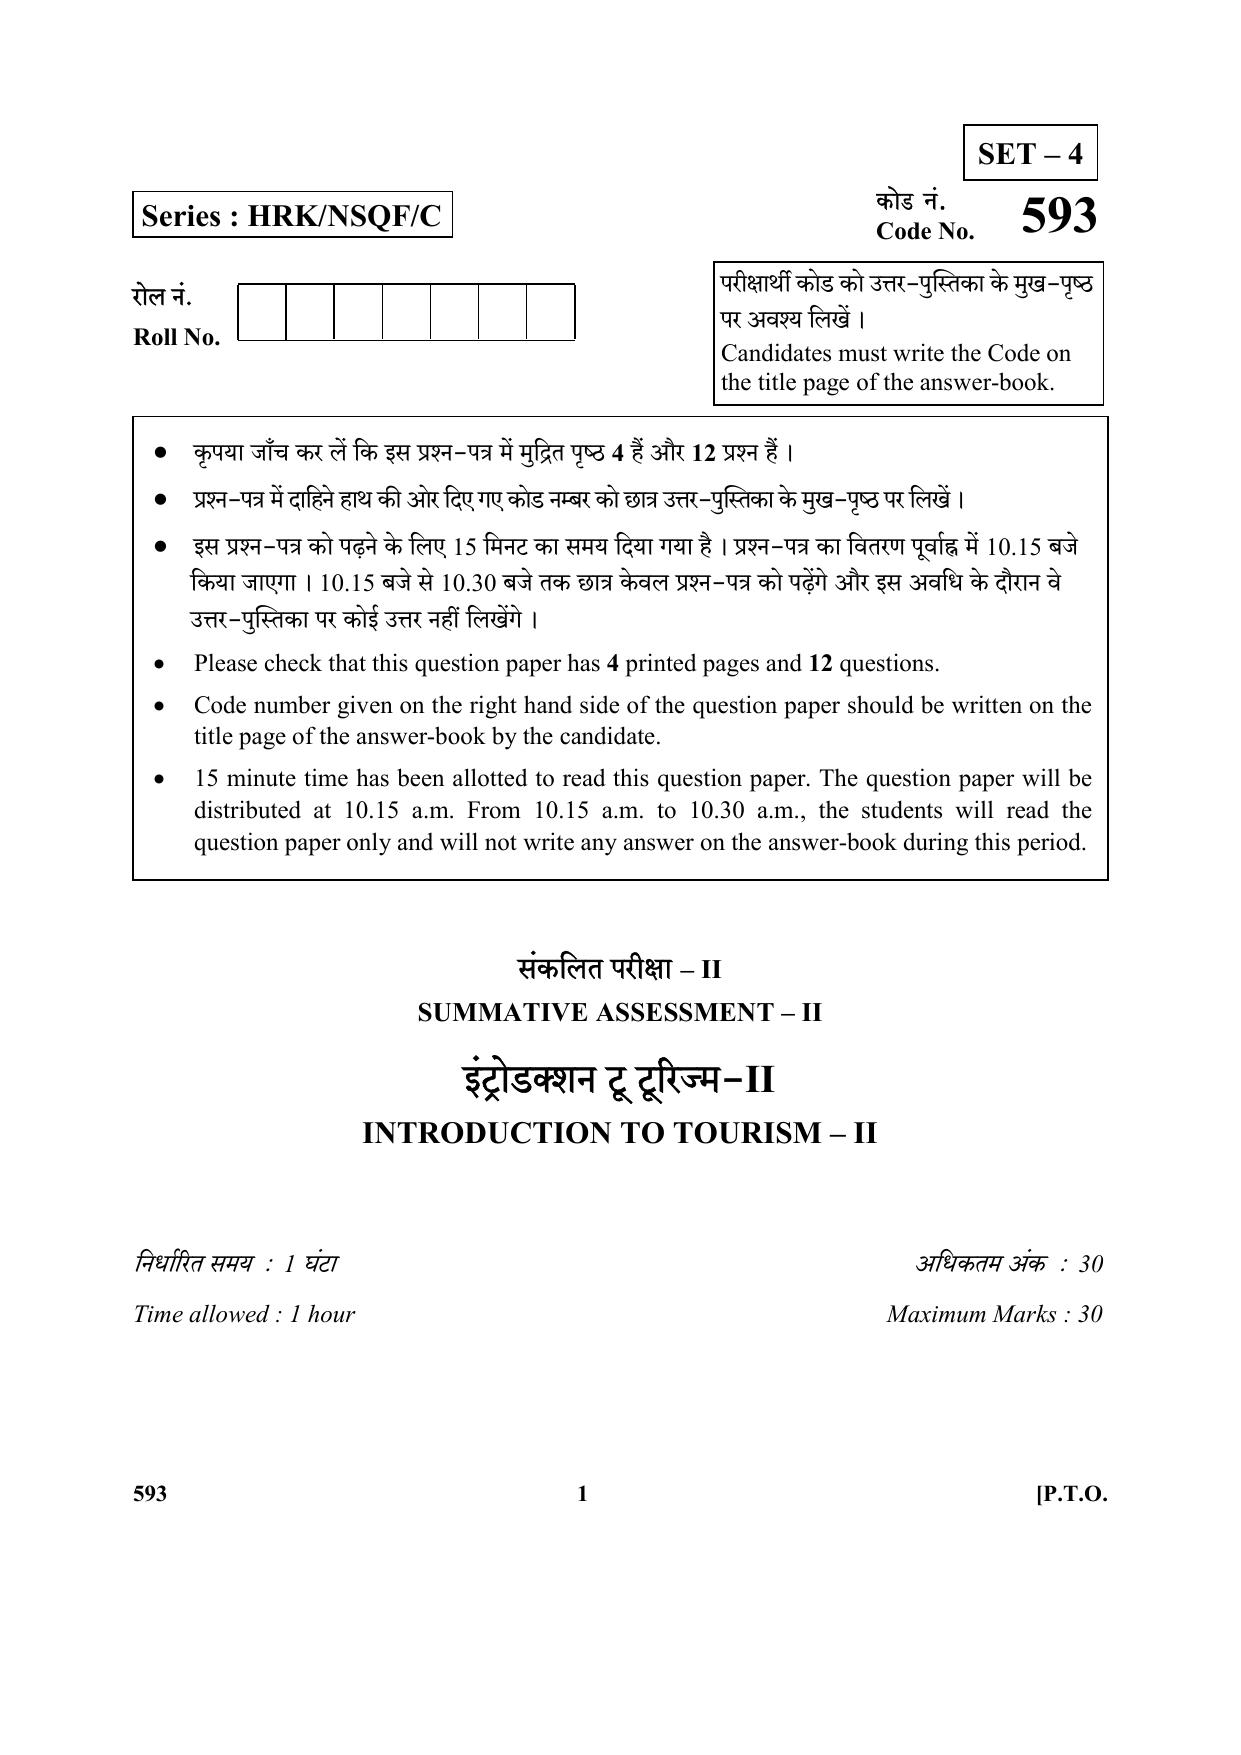 CBSE Class 10 Intro. To Tourism II_N 2017-comptt Question Paper - Page 1